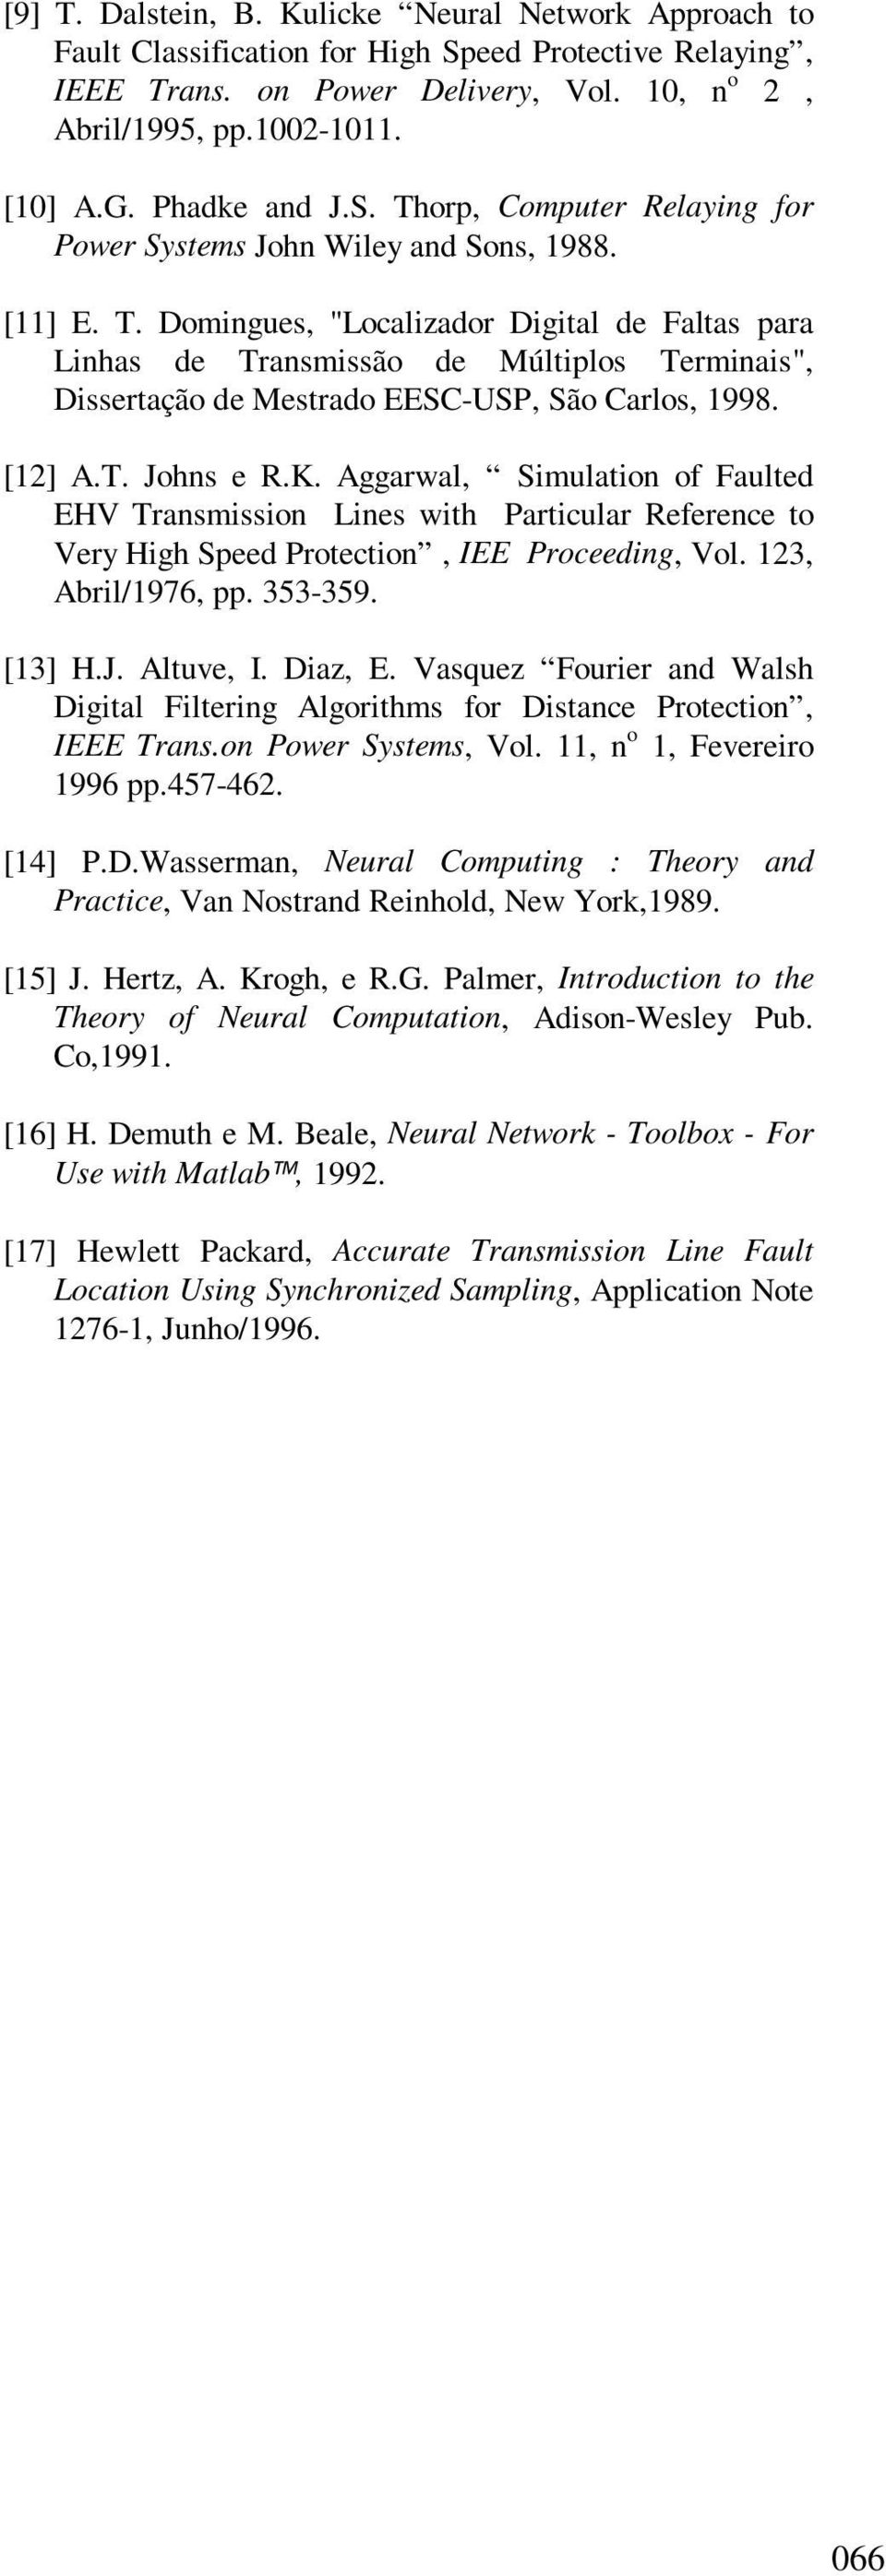 [12] A.T. Johns e R.K. Aggarwal, Simulation of Faulted EHV Transmission Lines with Particular Reference to Very High Speed Protection, IEE Proceeding, Vol. 123, Abril/1976, pp. 353-359. [13] H.J. Altuve, I.